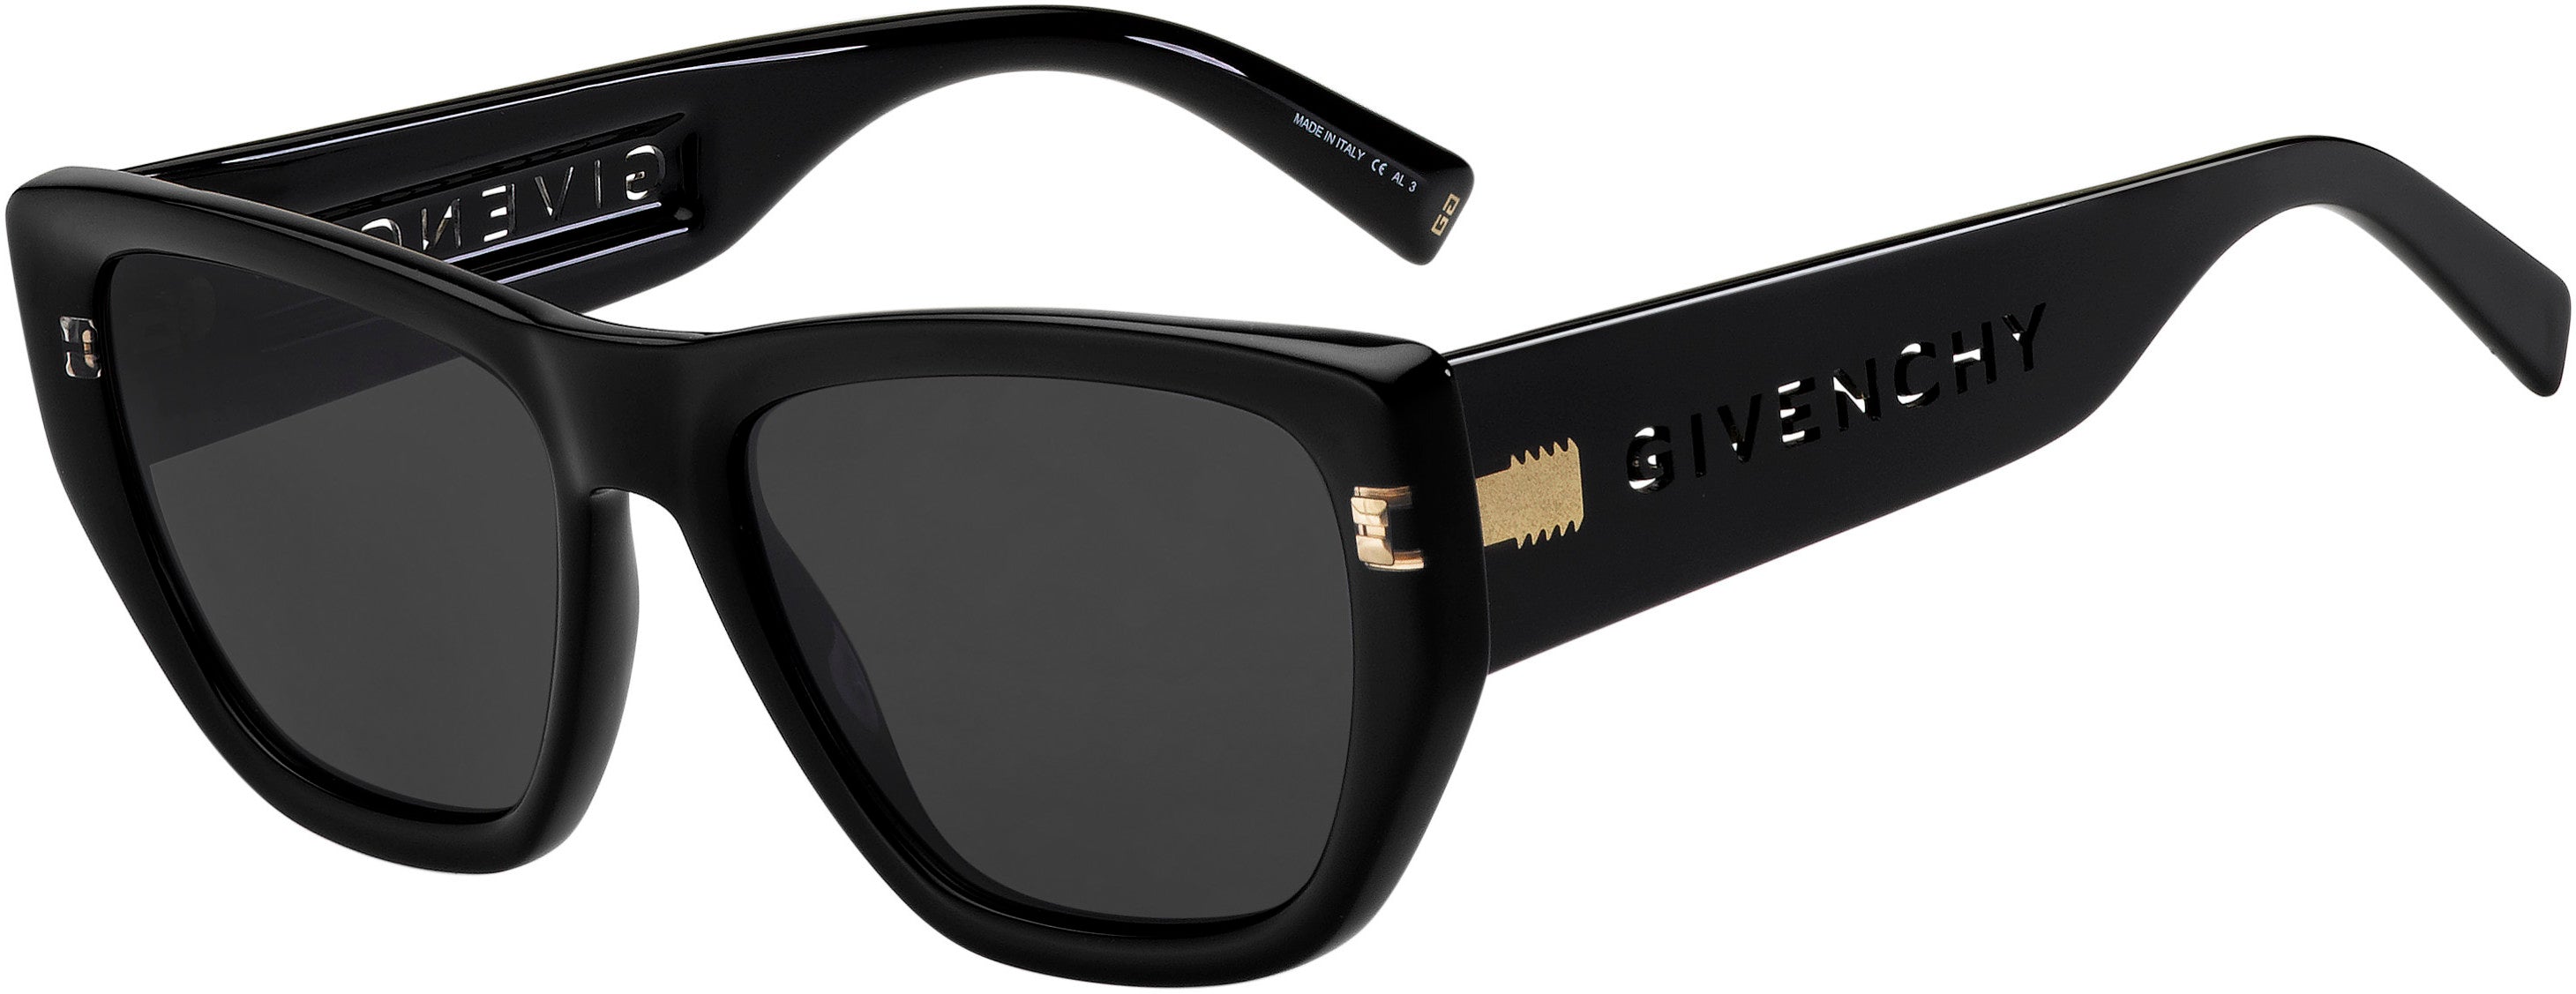  Givenchy 7202/S Cat Eye/butterfly Sunglasses 0807-0807  Black (IR Gray)